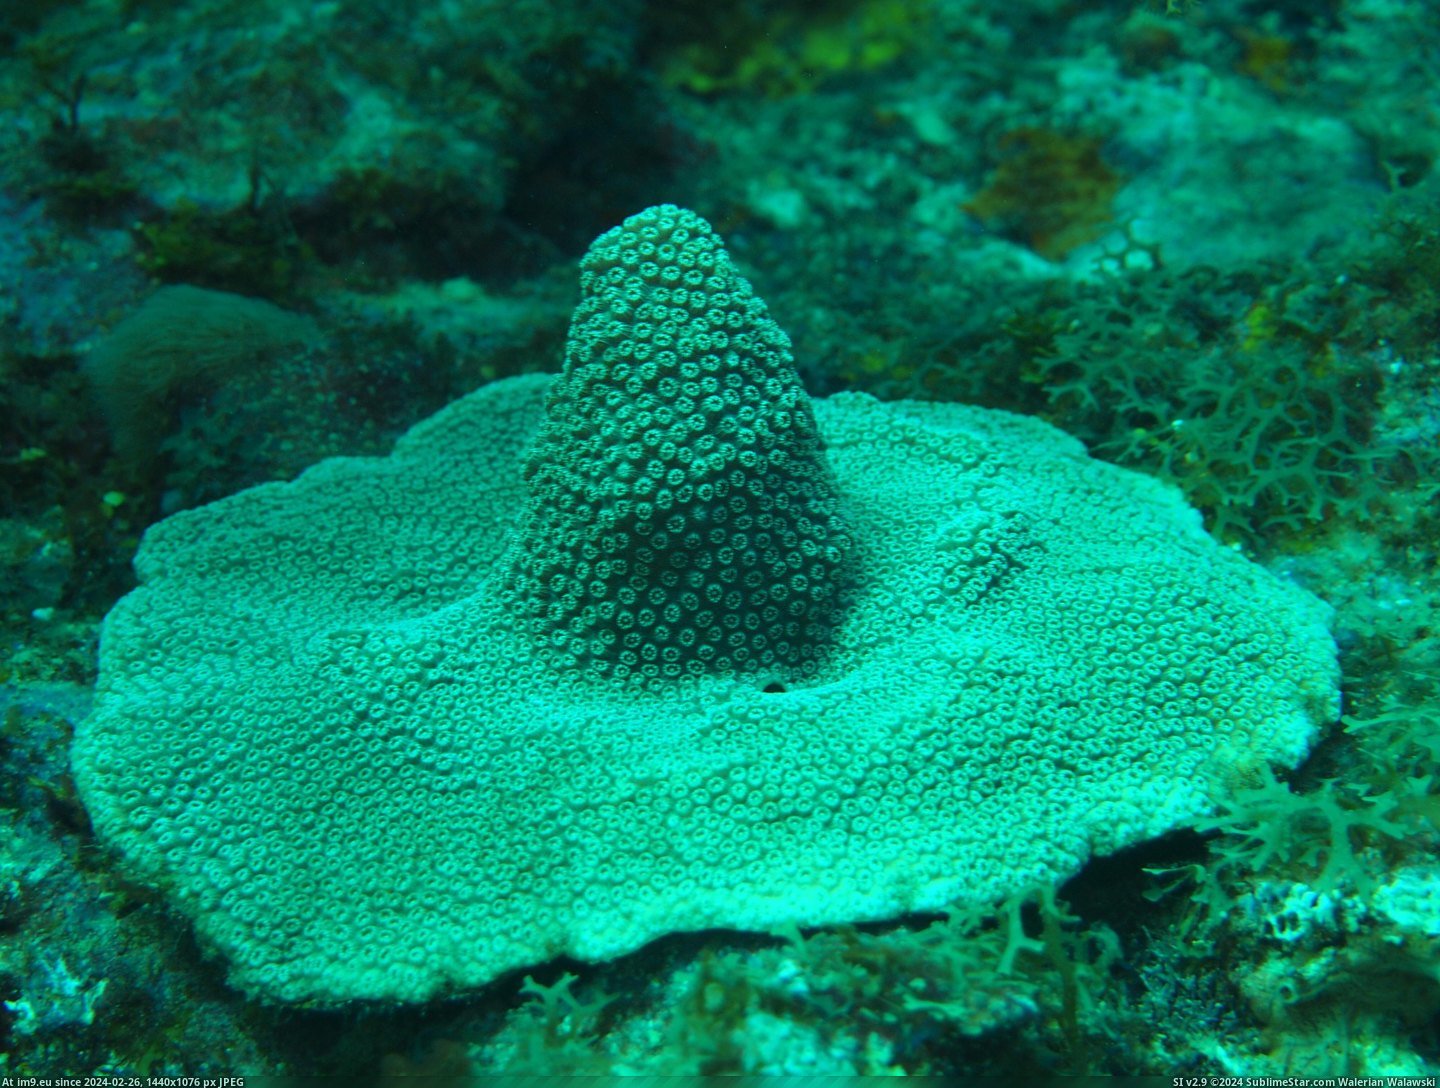 #Star #Saw #Coral #Scuba #Diving #Hat #Witch [Mildlyinteresting] This star coral I saw while SCUBA diving looks like a witch's hat. Pic. (Изображение из альбом My r/MILDLYINTERESTING favs))